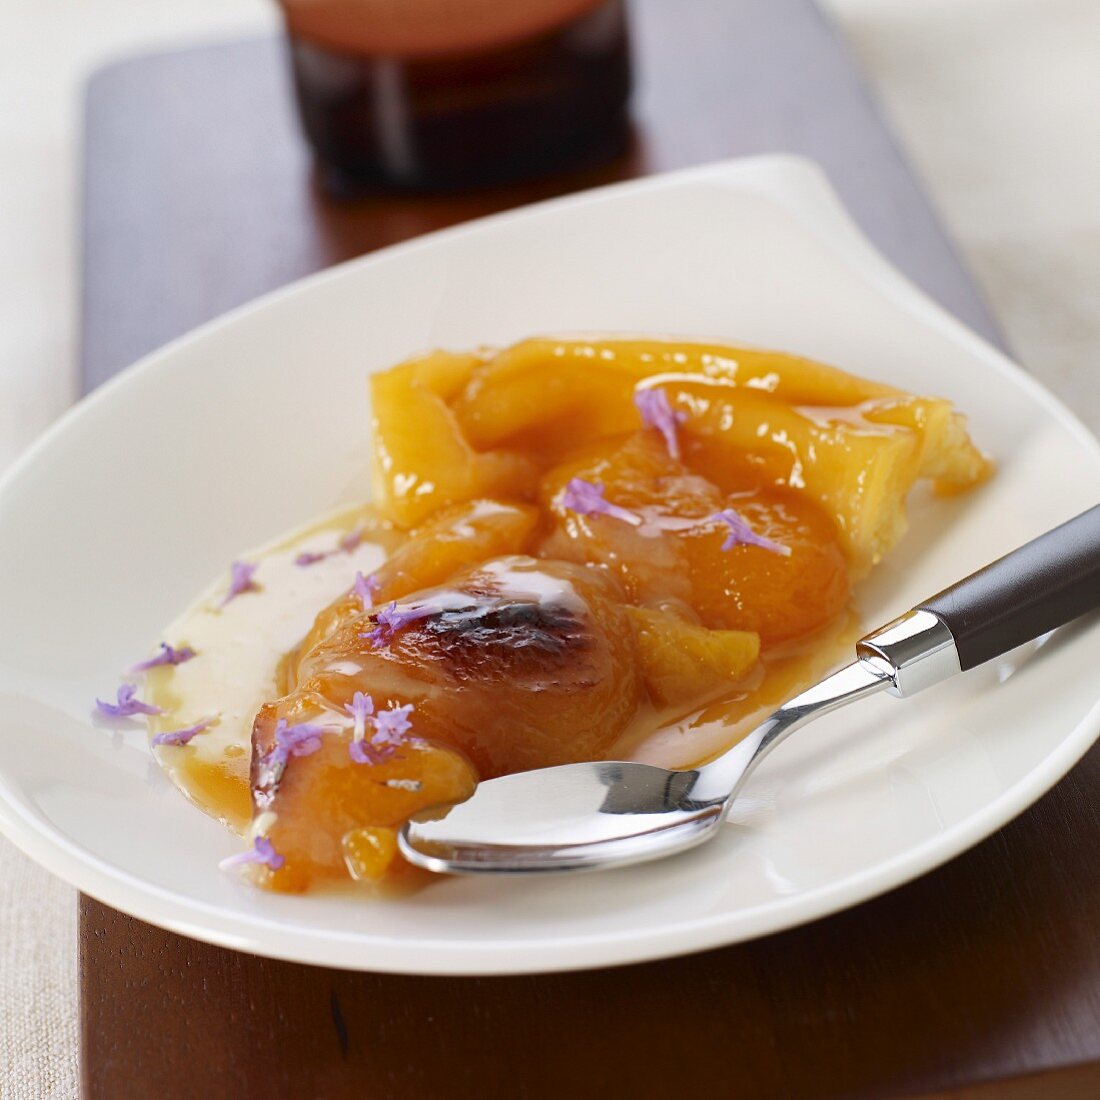 Portion of upside-down apricot tart